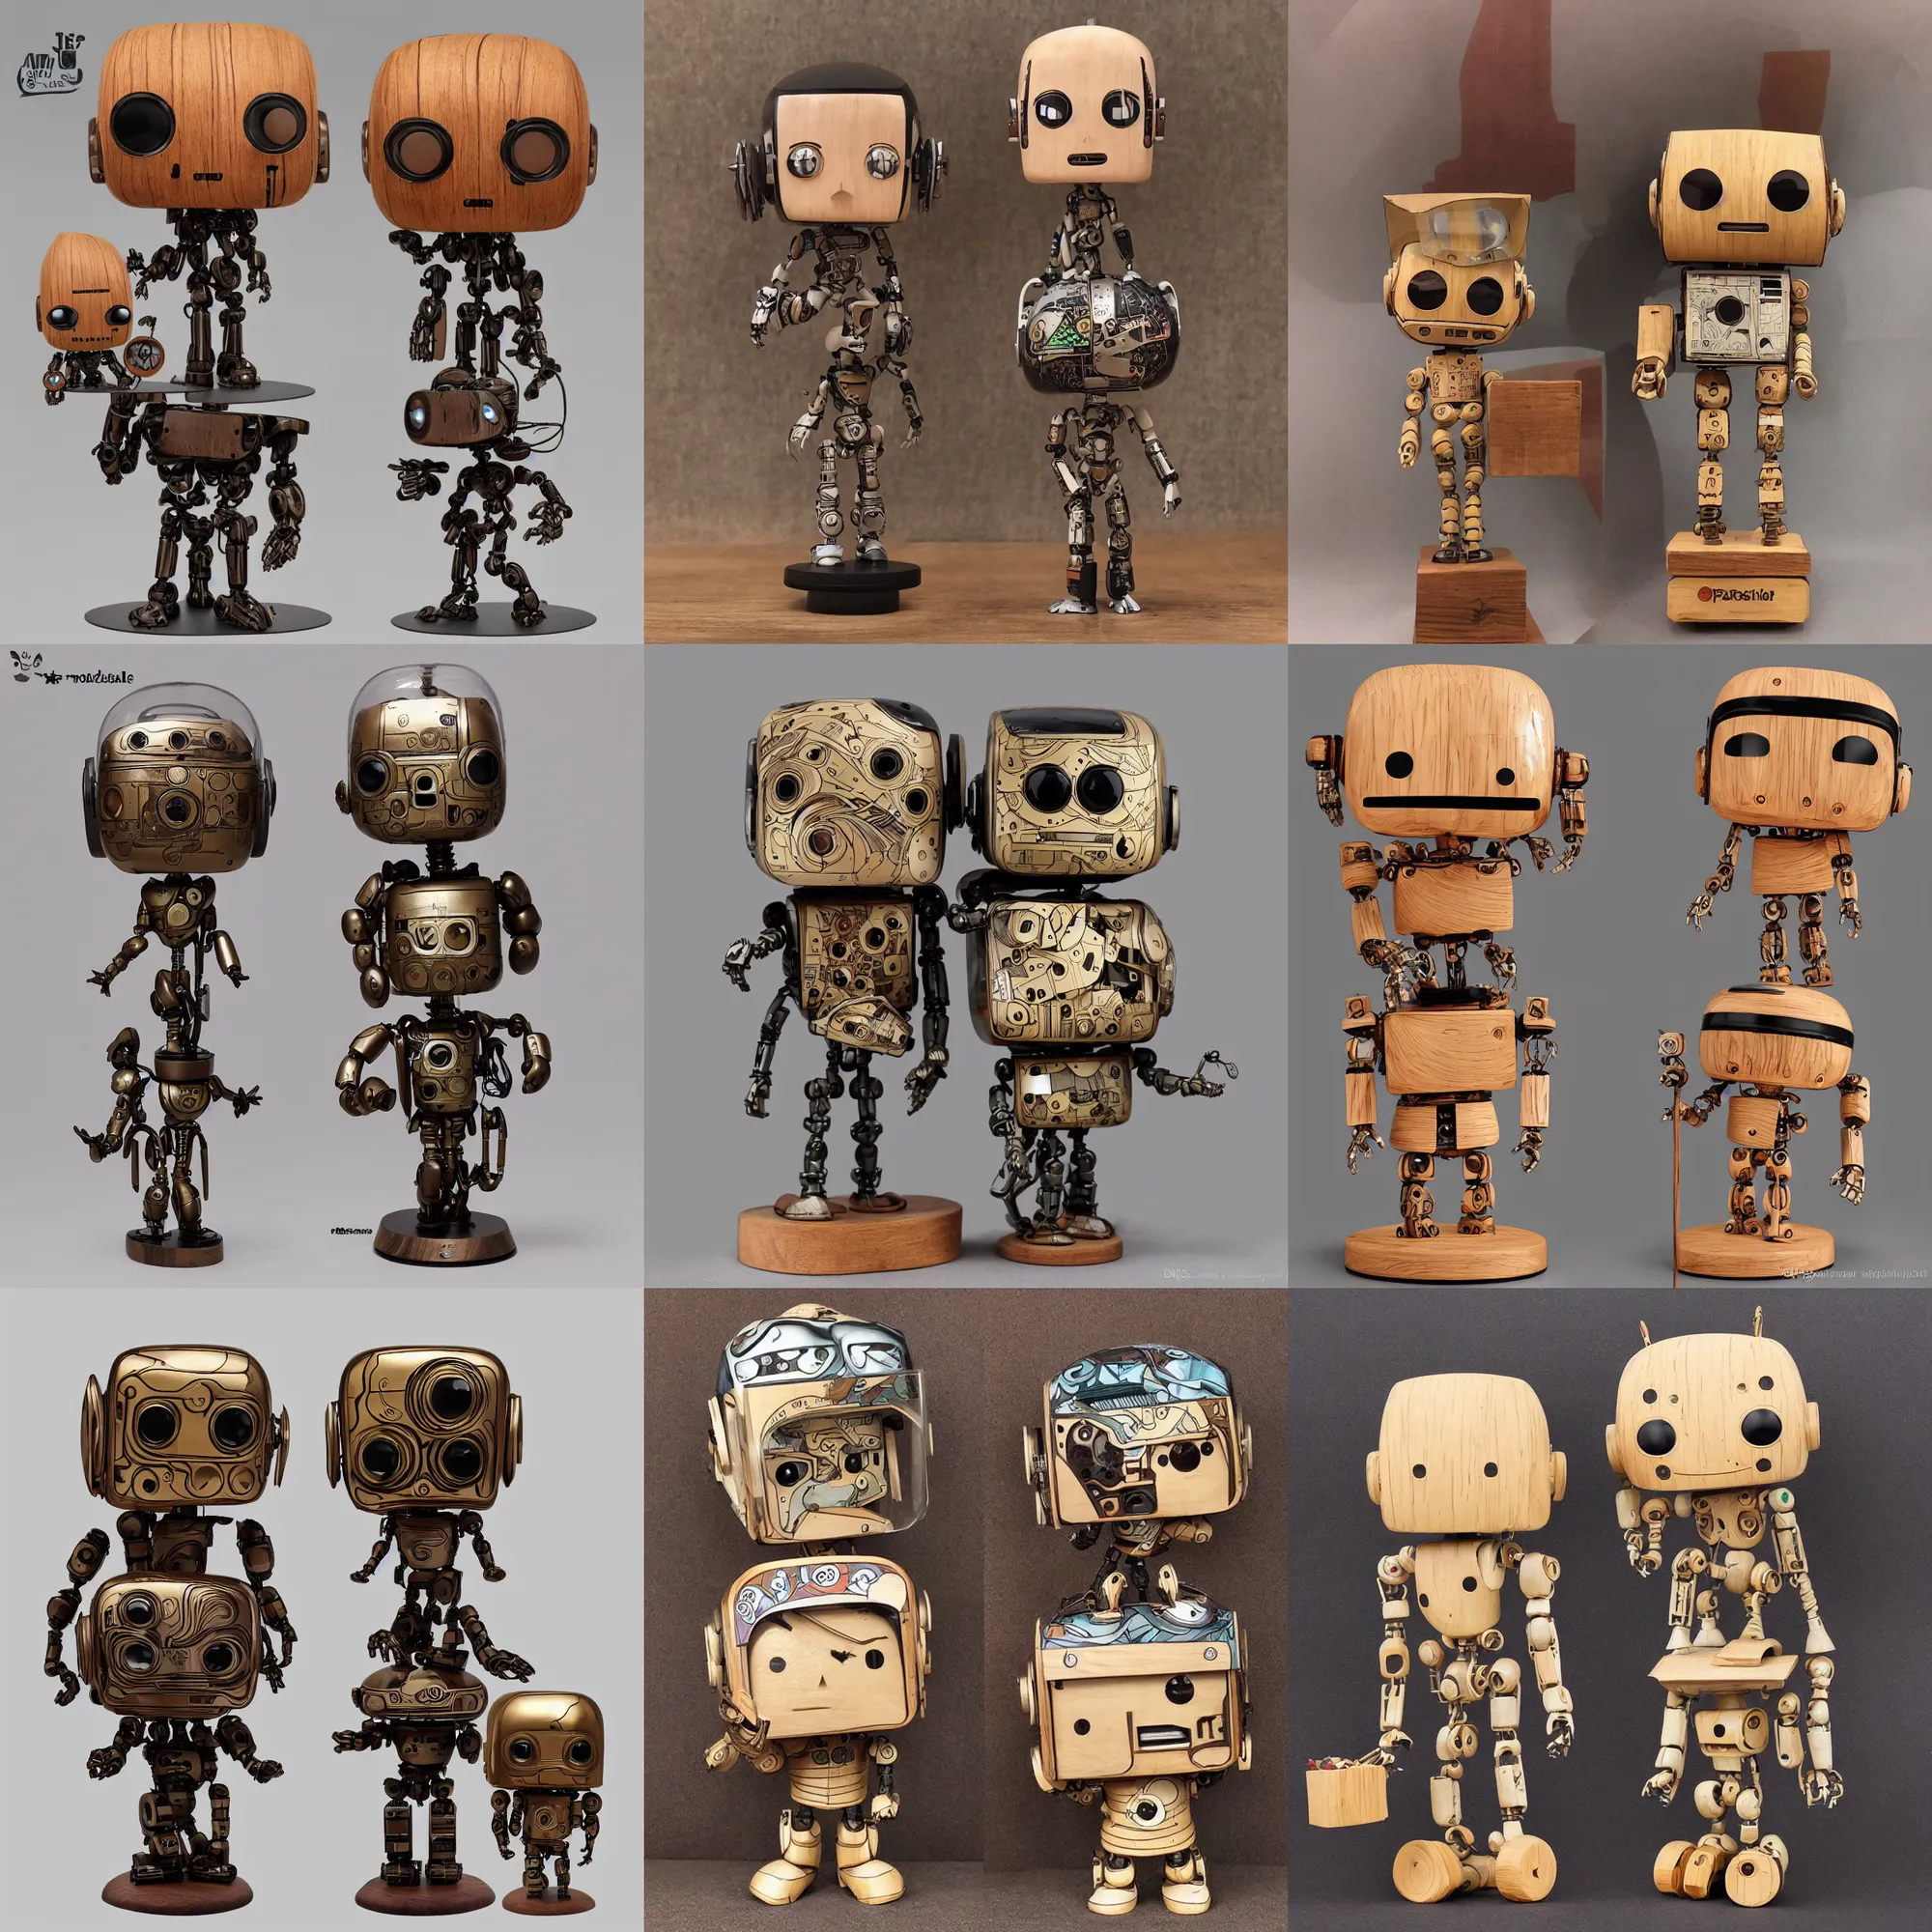 Prompt: realistic a wooden sculpture art toys collectible very cute android robot mascot pop collectible figure cyberpunk as a alphonse mucha funko